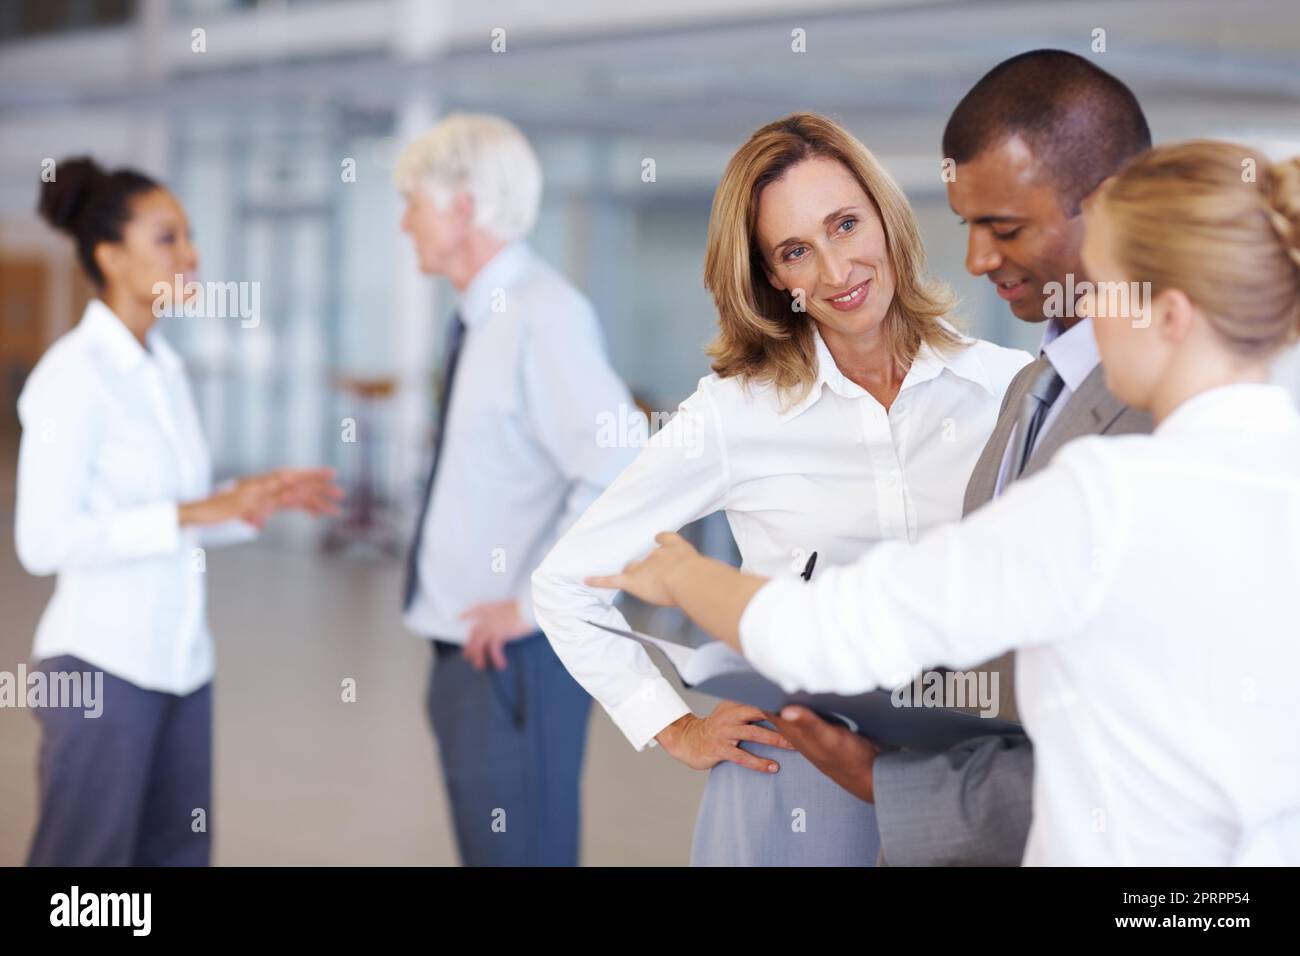 Business people working together. Portrait of multi racial business people working together at office. Stock Photo